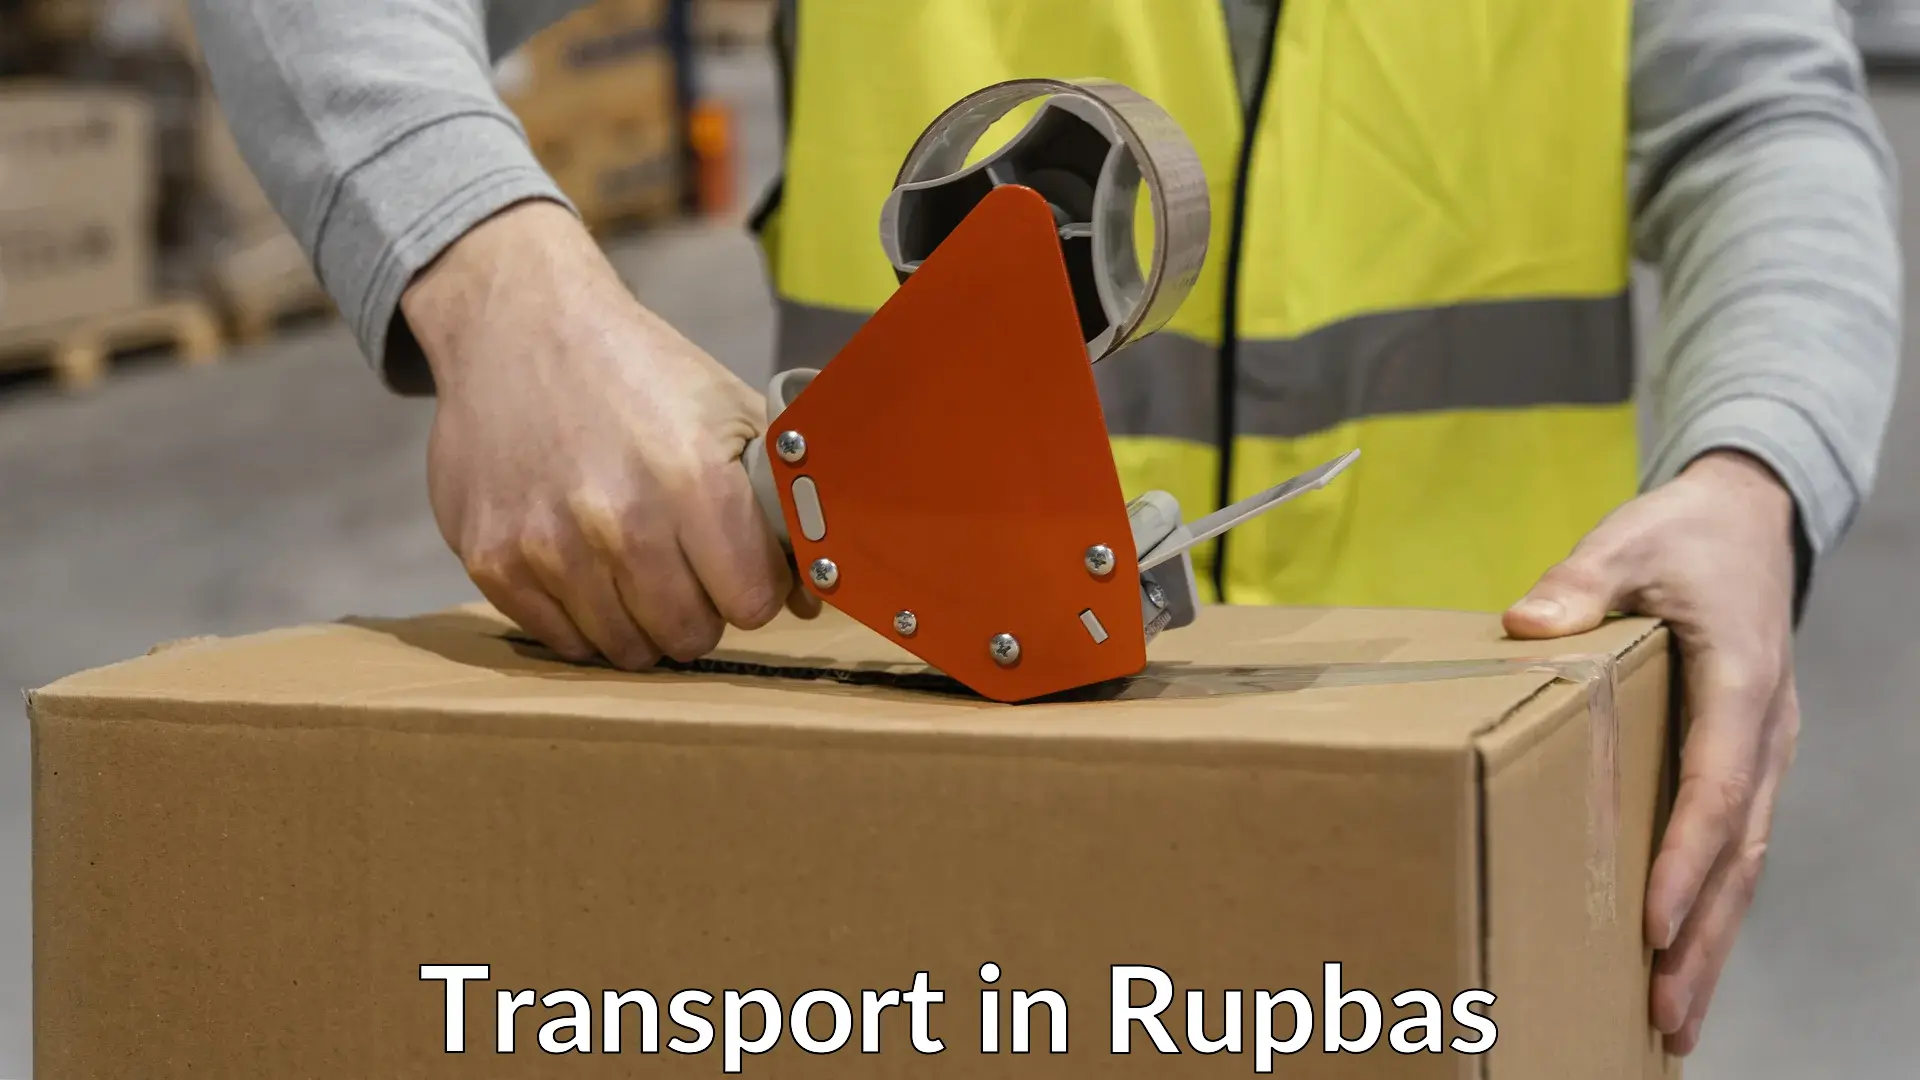 Vehicle transport services in Rupbas